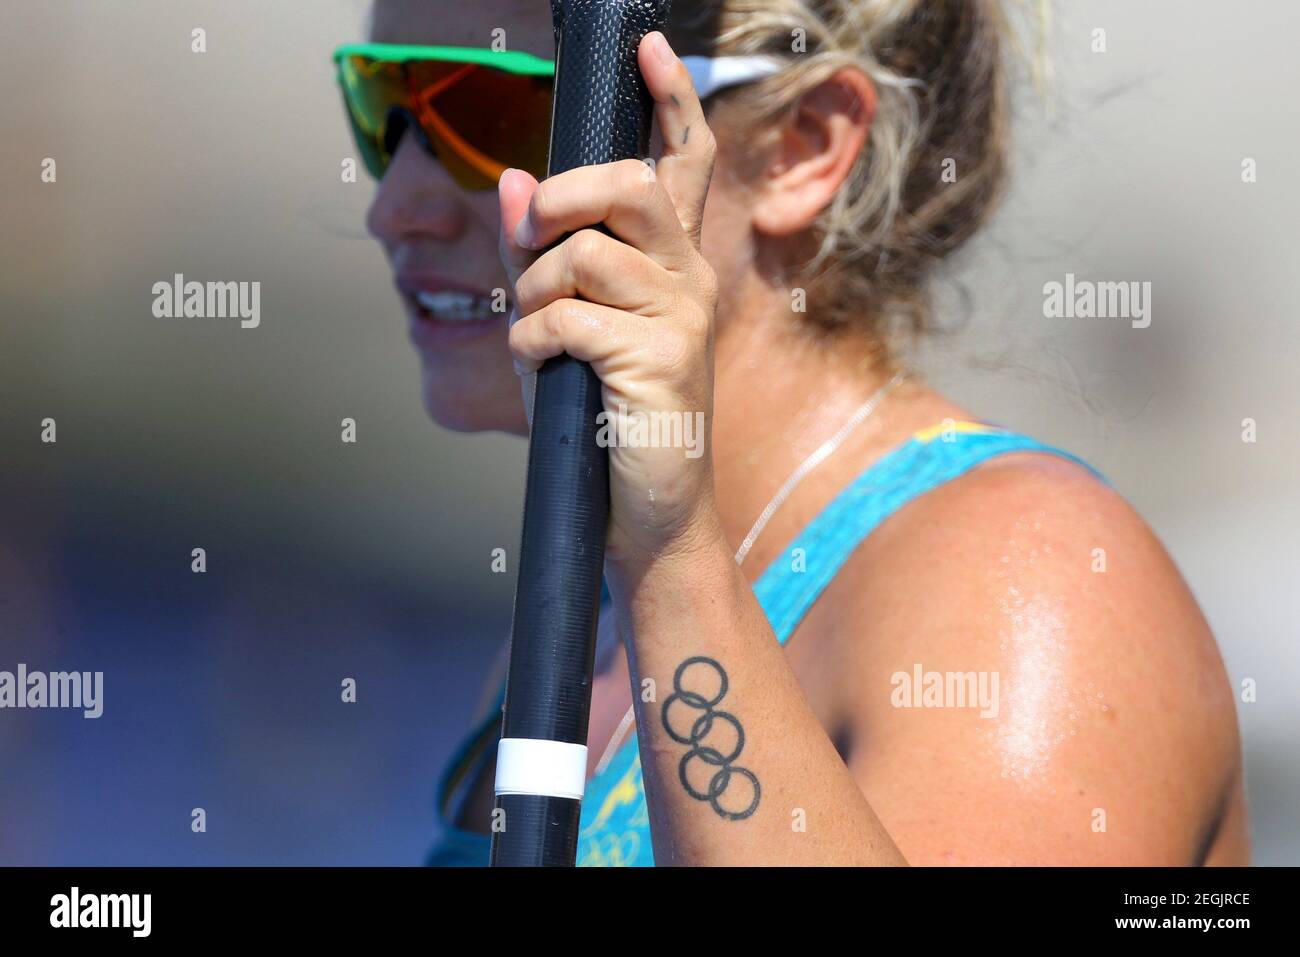 2016 Rio Olympics - Canoe Sprint - Semifinal - Women's Kayak Single (K1) 500m - Semifinal - Lagoa Stadium - Rio de Janeiro, Brazil - 17/08/2016. Naomi Flood (AUS) of Australia with Olympic rings tattoo on her arm. REUTERS/Murad Sezer FOR EDITORIAL USE ONLY. NOT FOR SALE FOR MARKETING OR ADVERTISING CAMPAIGNS.   Picture Supplied by Action Images Stock Photo